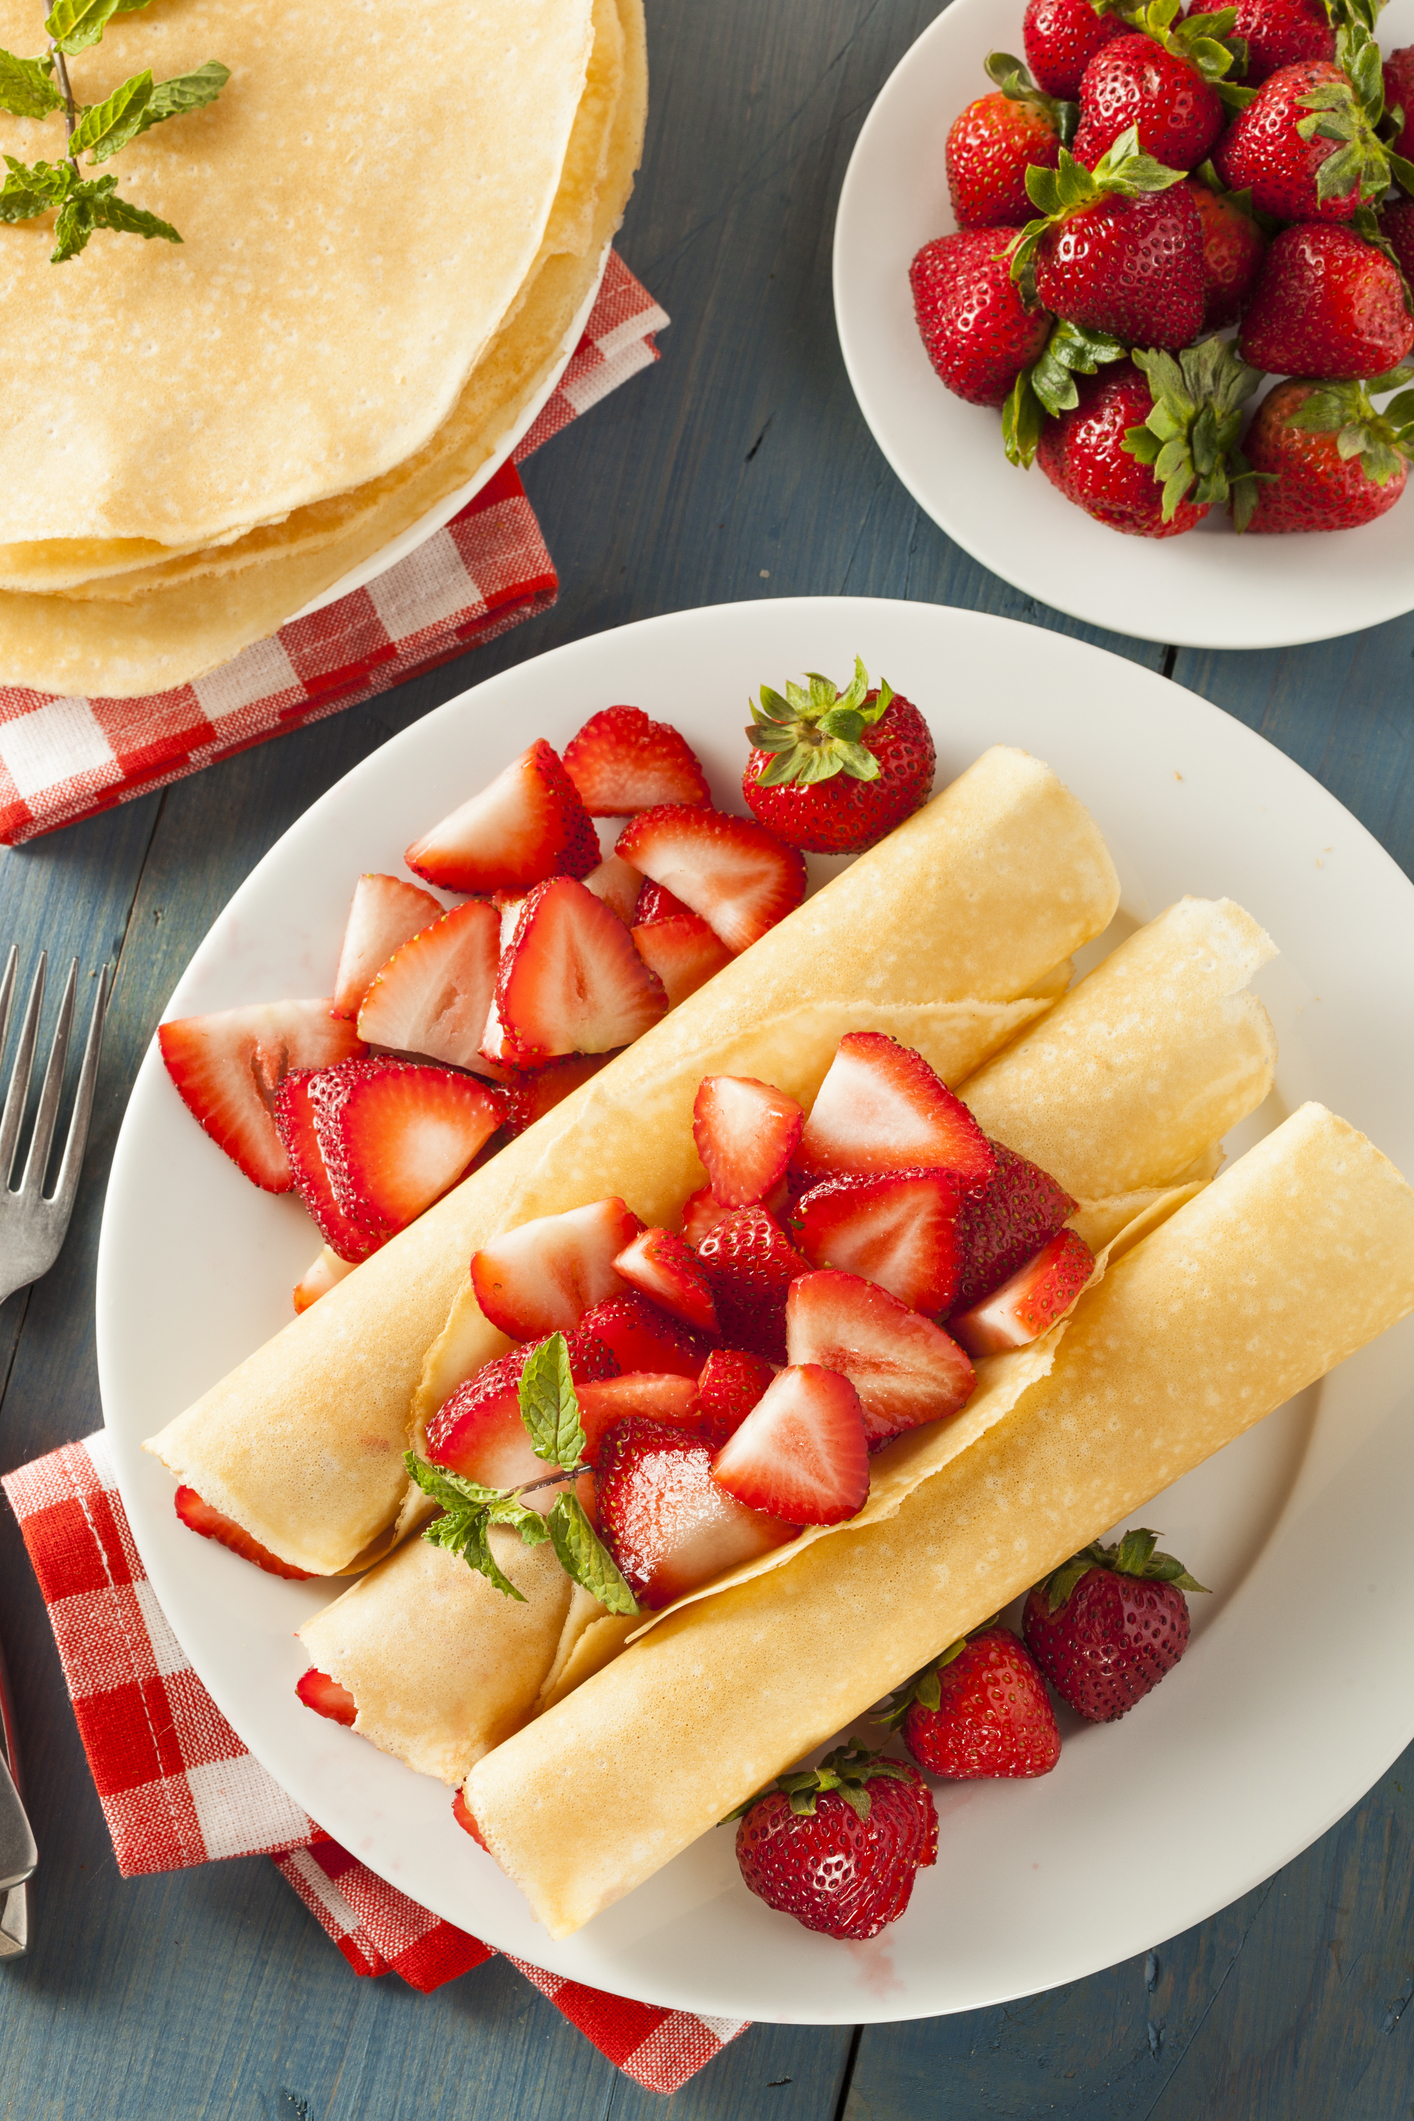 Crêpe Recipe for National Crêpes Day - March 22 - Positively Stacey